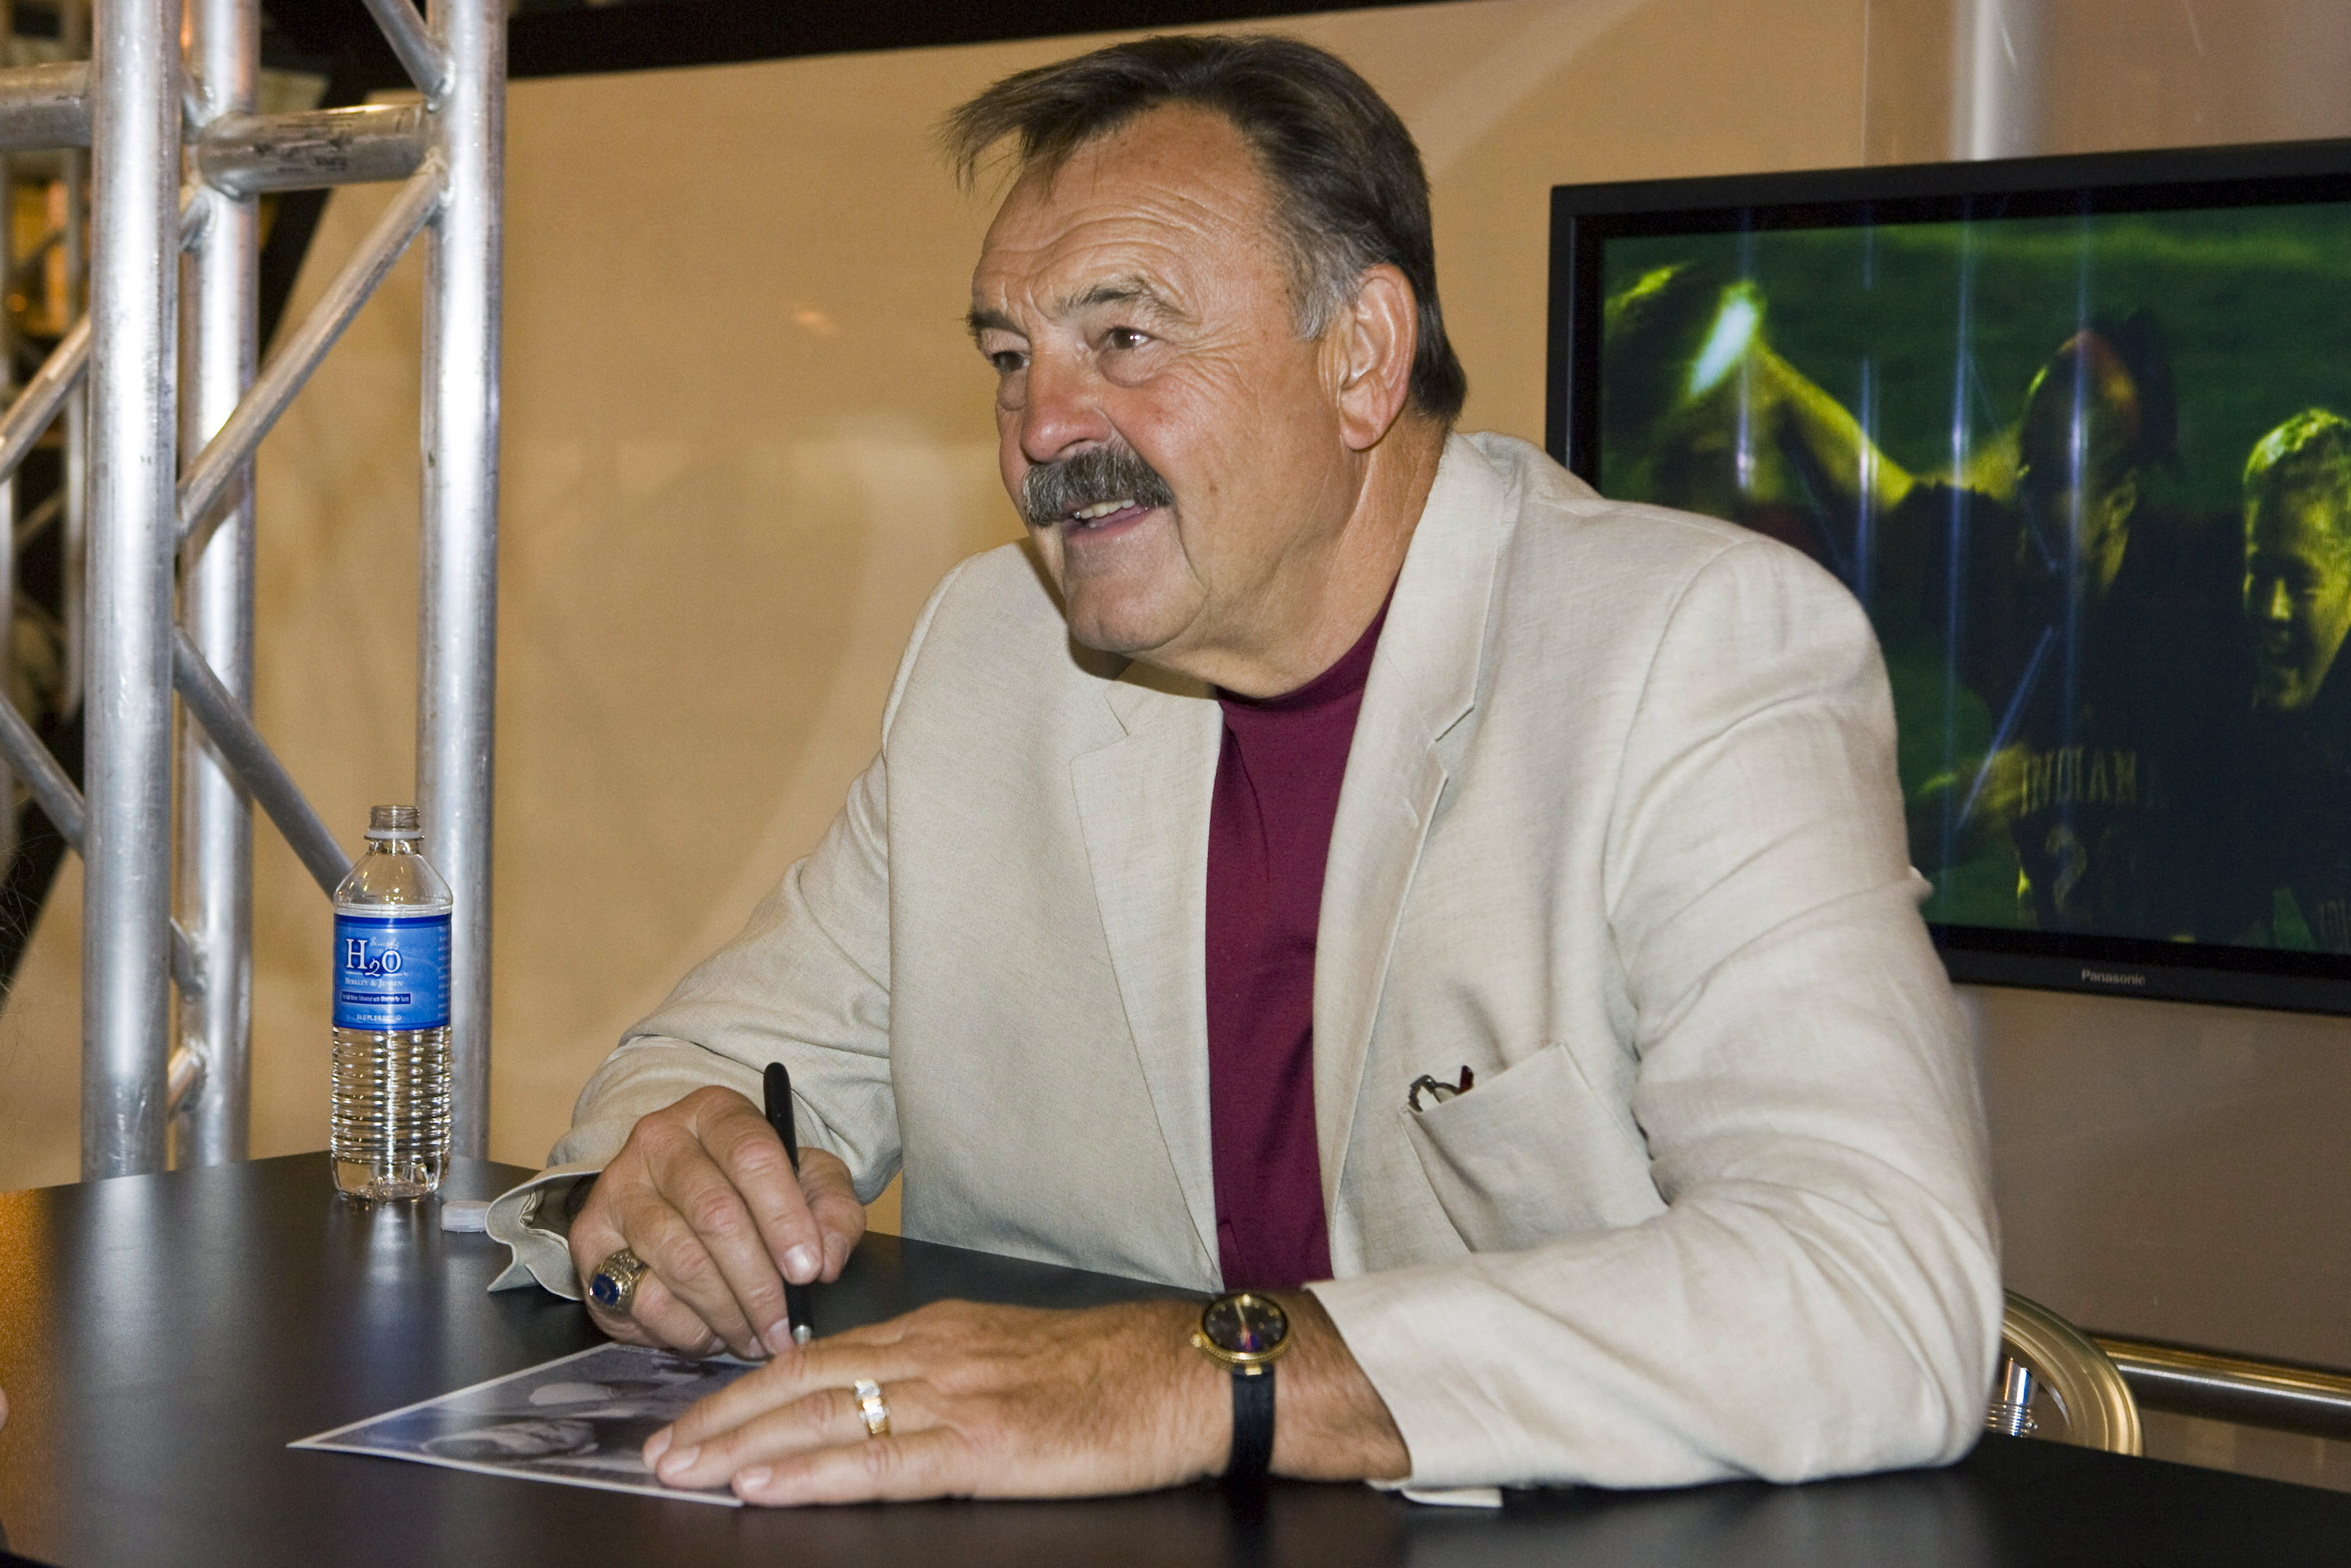 NEW ORLEANS - MAY 19: 2008 Pro Football Hall of Fame member and legendary Chicago Bears linebacker Dick Butkus takes time to sign footballs for fans in the Fox Cable Networks' booth at the The Cable Show in the Ernest N. Morial Convention Center on May 19